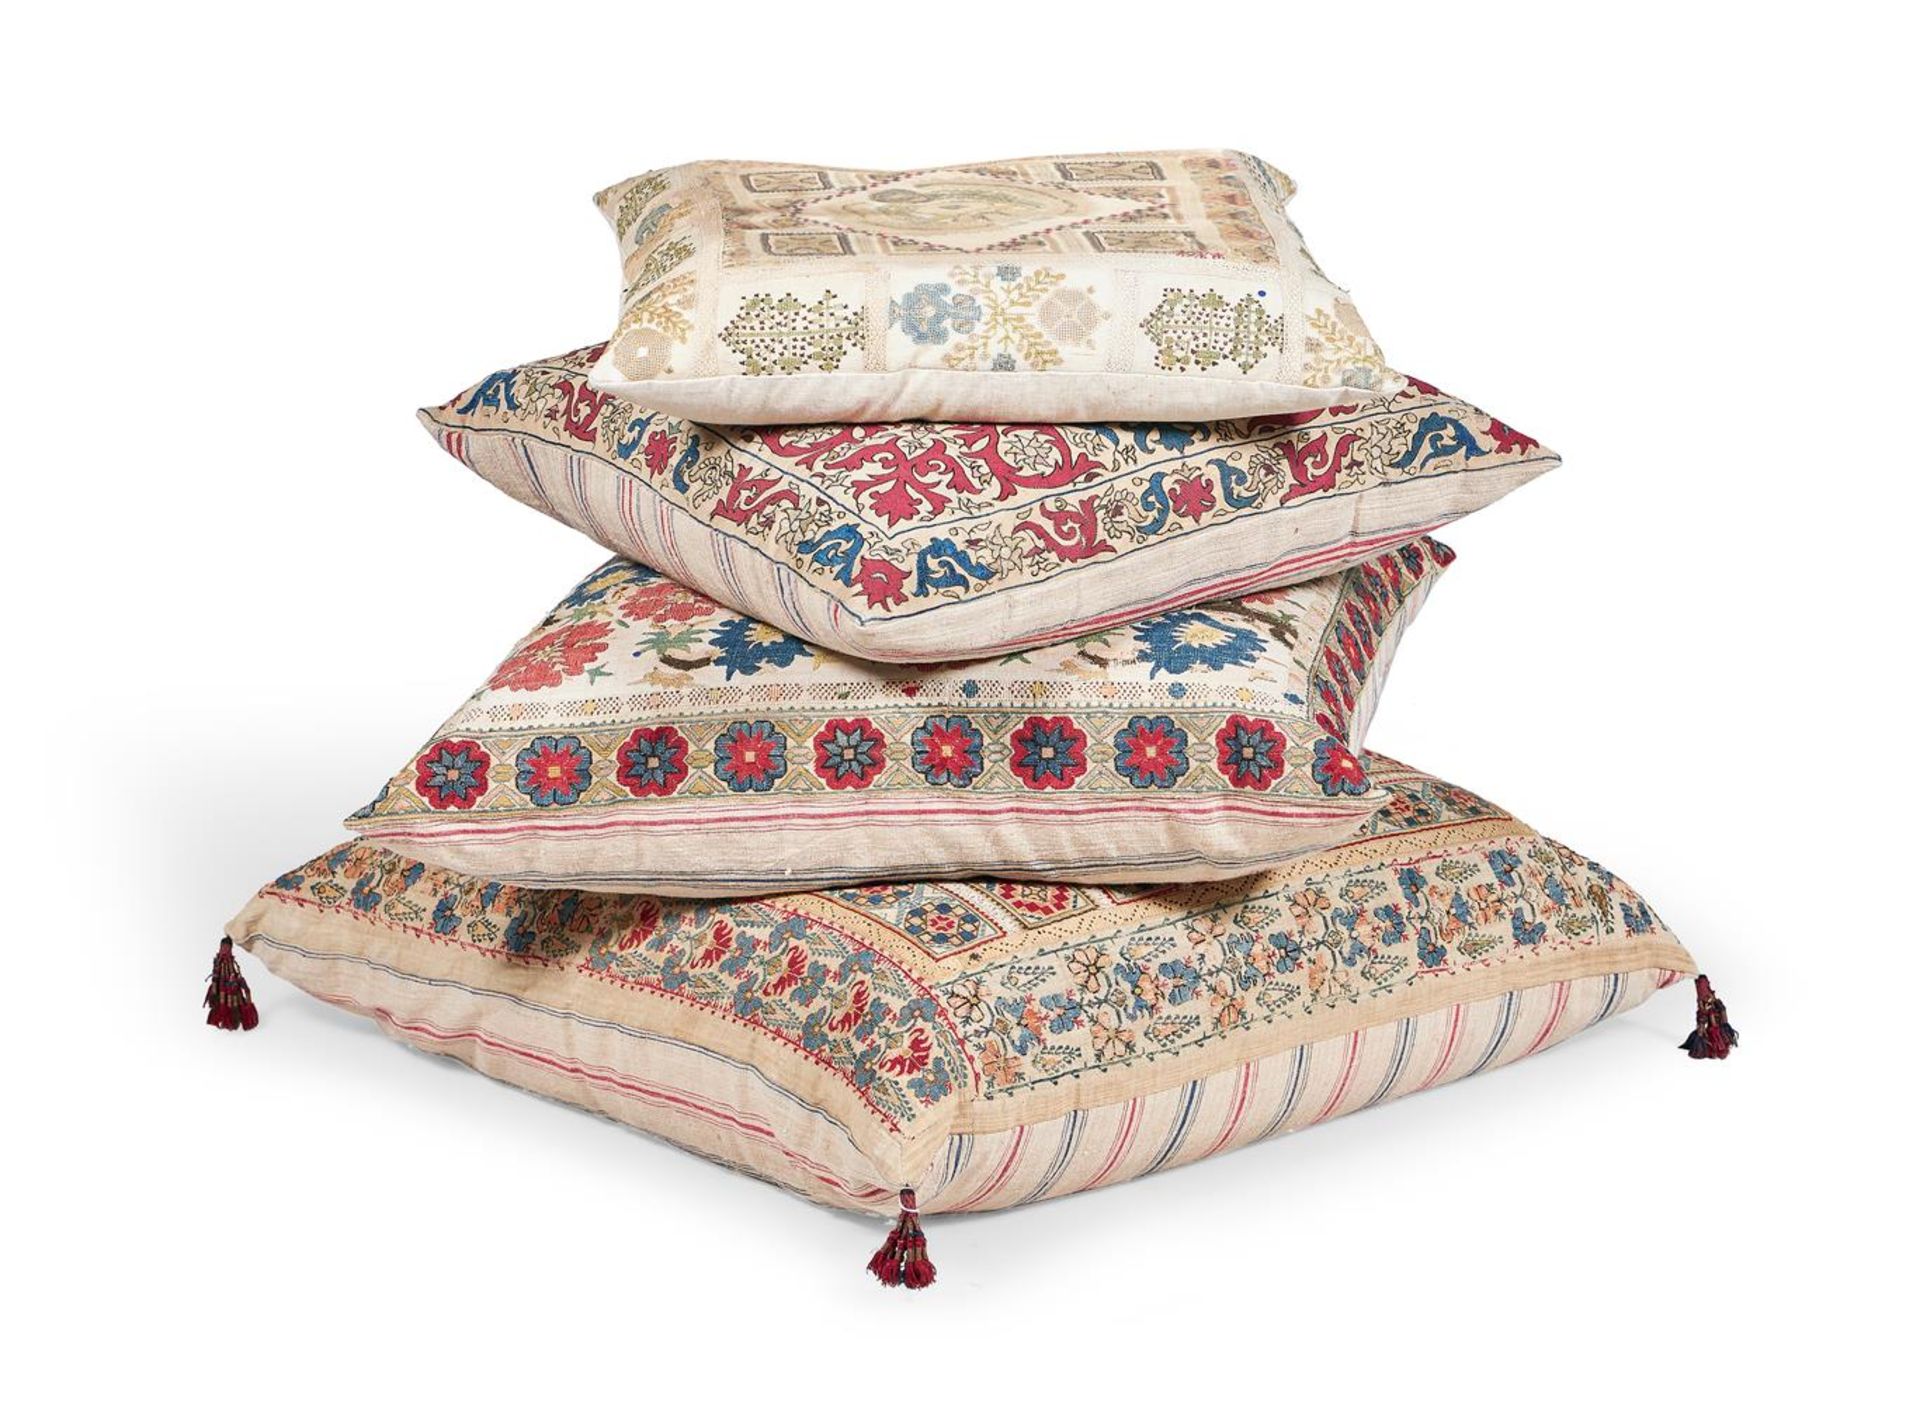 A GROUP OF FOUR OTTOMAN EMBROIDERED CUSHIONS, 19TH CENTURY